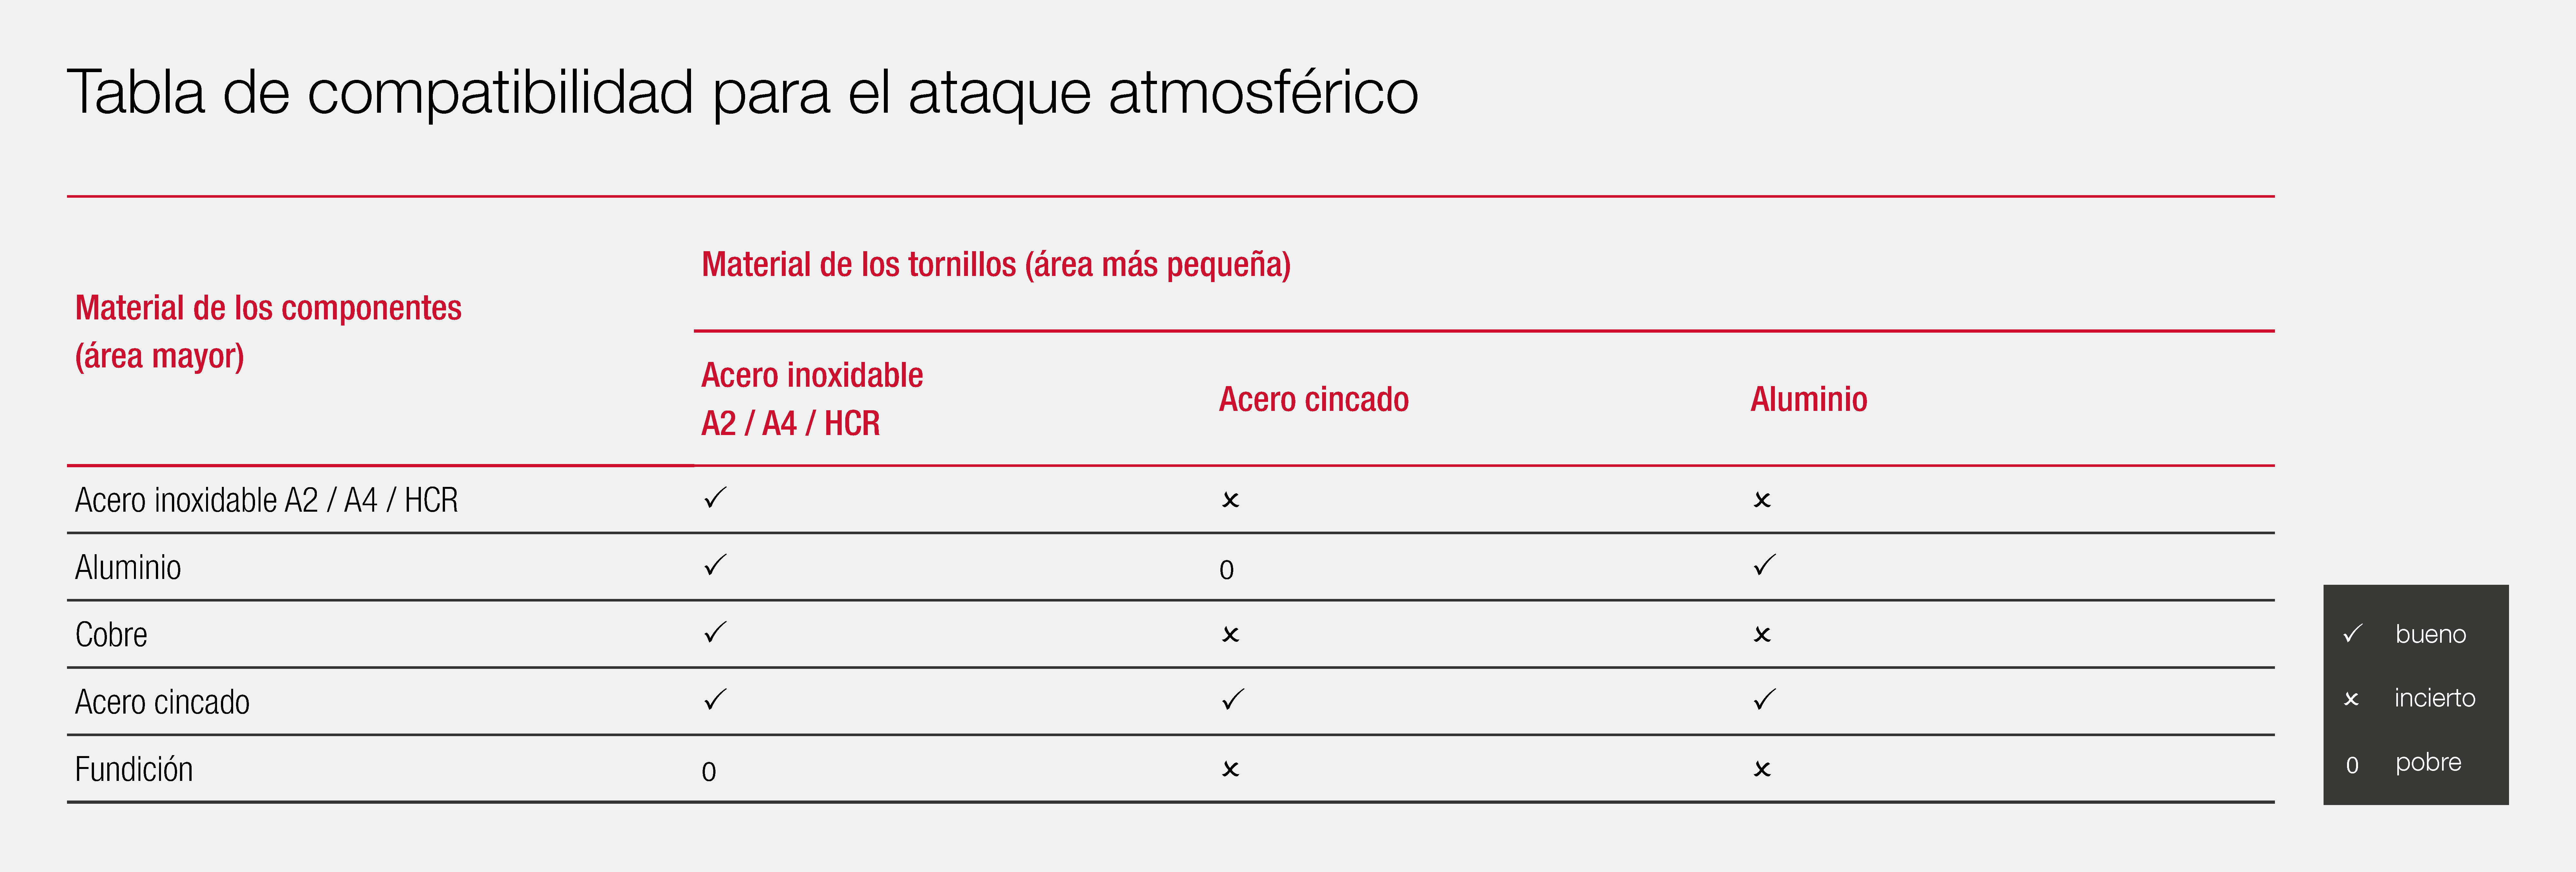 Compatibility_table_for_atmospheric_attack-1920x600px-EN.png